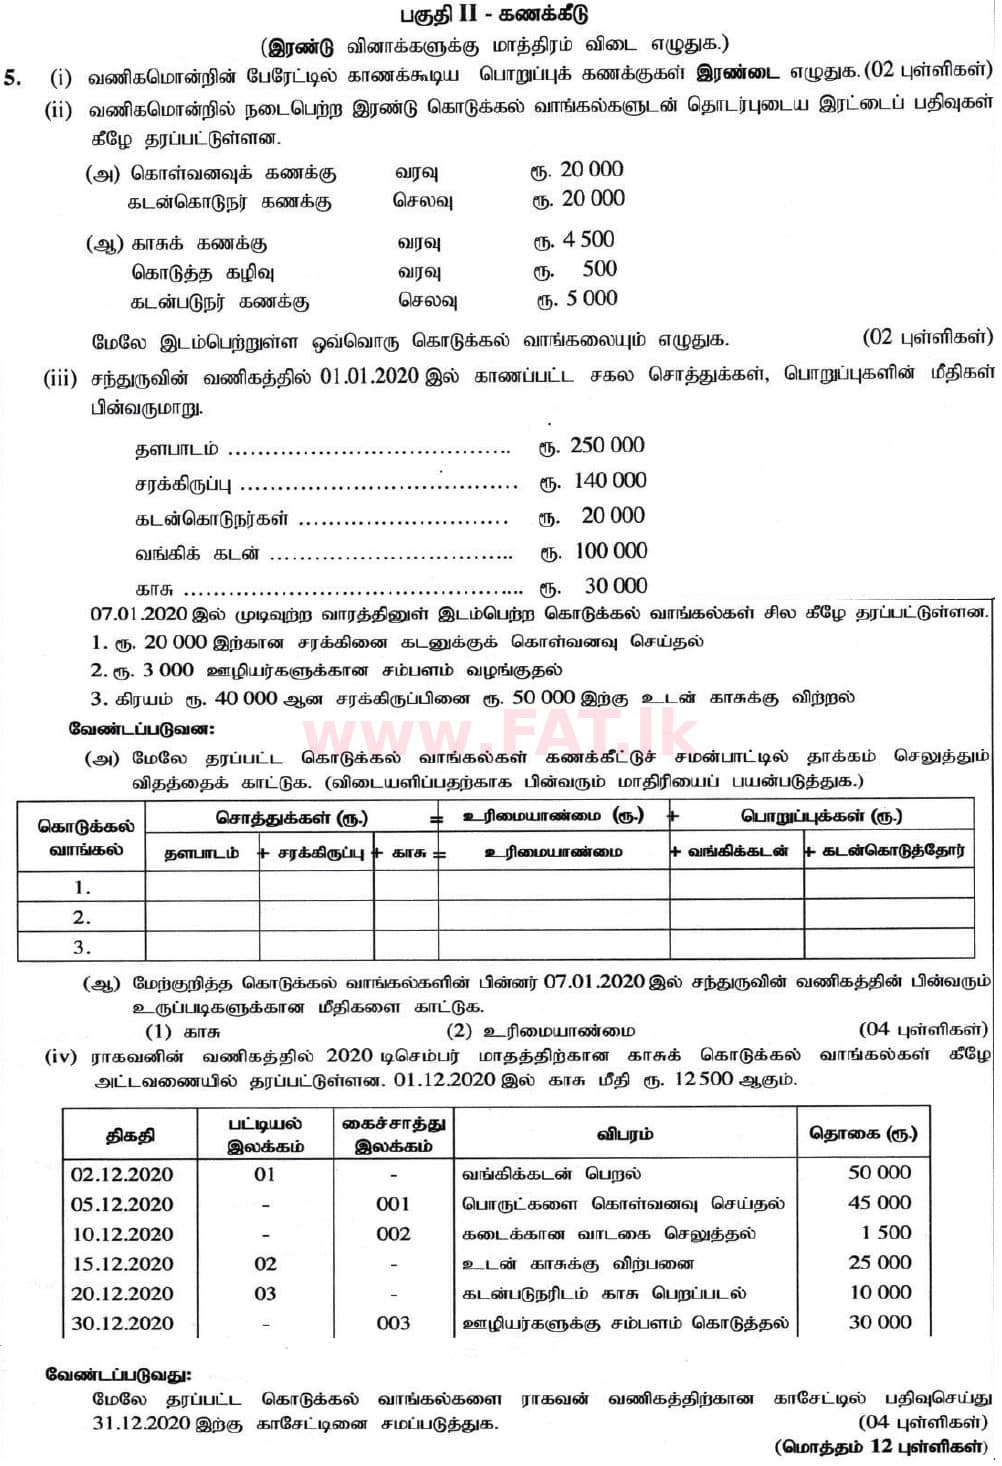 National Syllabus : Ordinary Level (O/L) Business and Accounting Studies - 2020 March - Paper II (தமிழ் Medium) 5 1